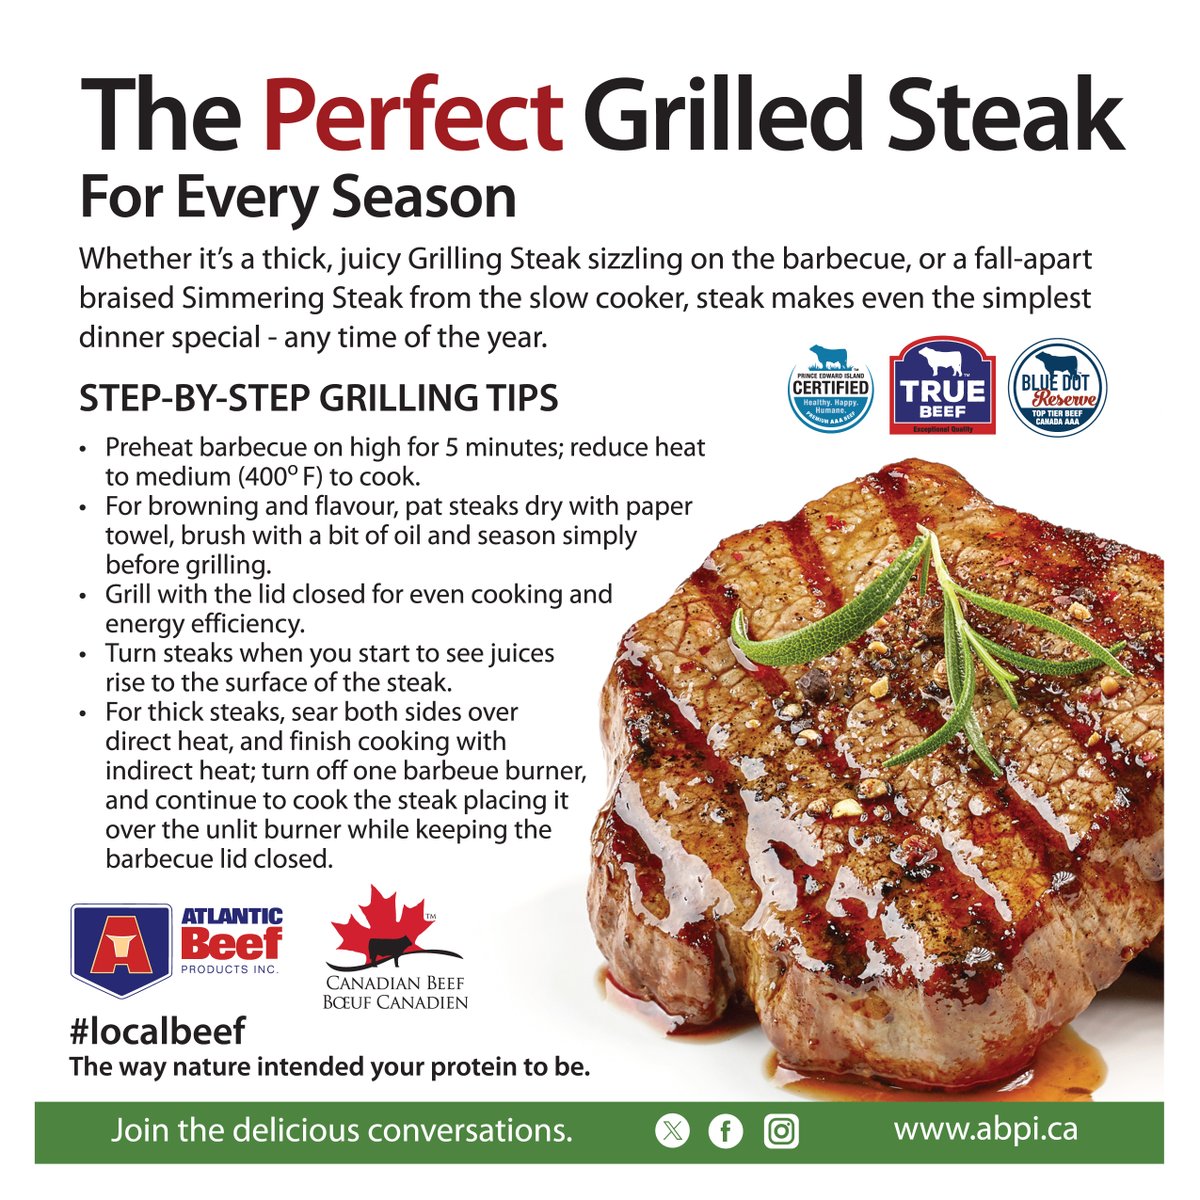 Steak makes even the simplest dinner special - any time of the year. #LocalBeef for Every Season. abpi.ca #PEIBeef #IslandBeef #SustainableBeef #SafeBeef #Protein #LocalBeef #HealthyBeef #BrainHealth #PEIBeef #IslandBeef #SustainableBeef #SafeBeef #Protein